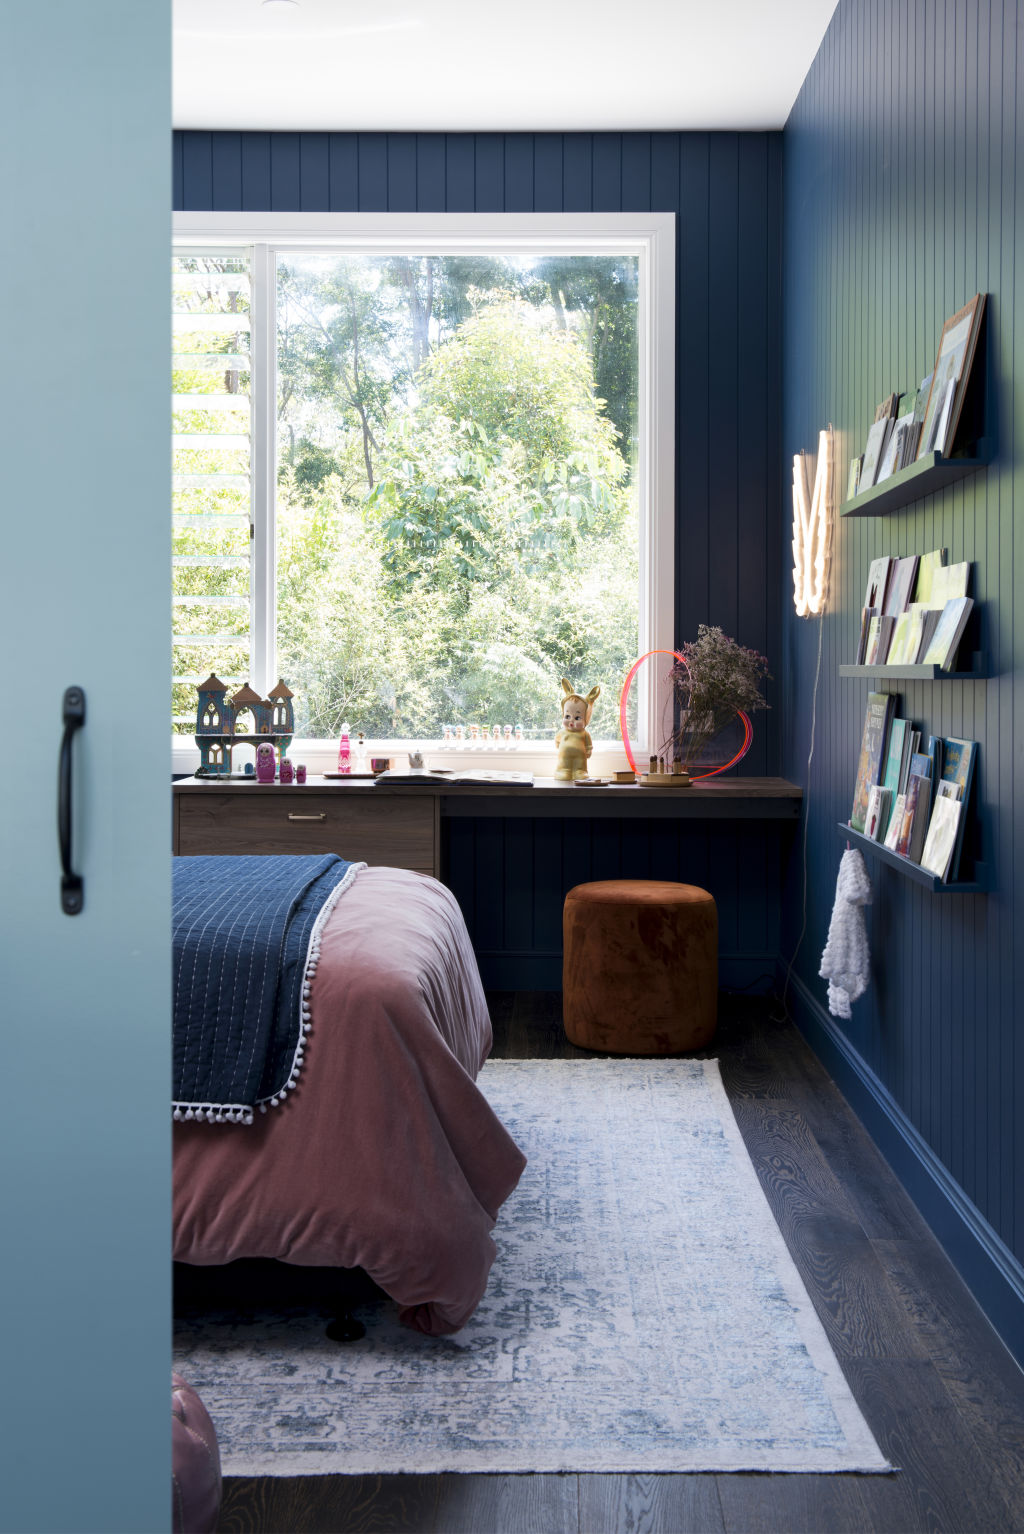 Painting a room is a sure-fire way to bring it back to life. Photo: Mindi Cooke